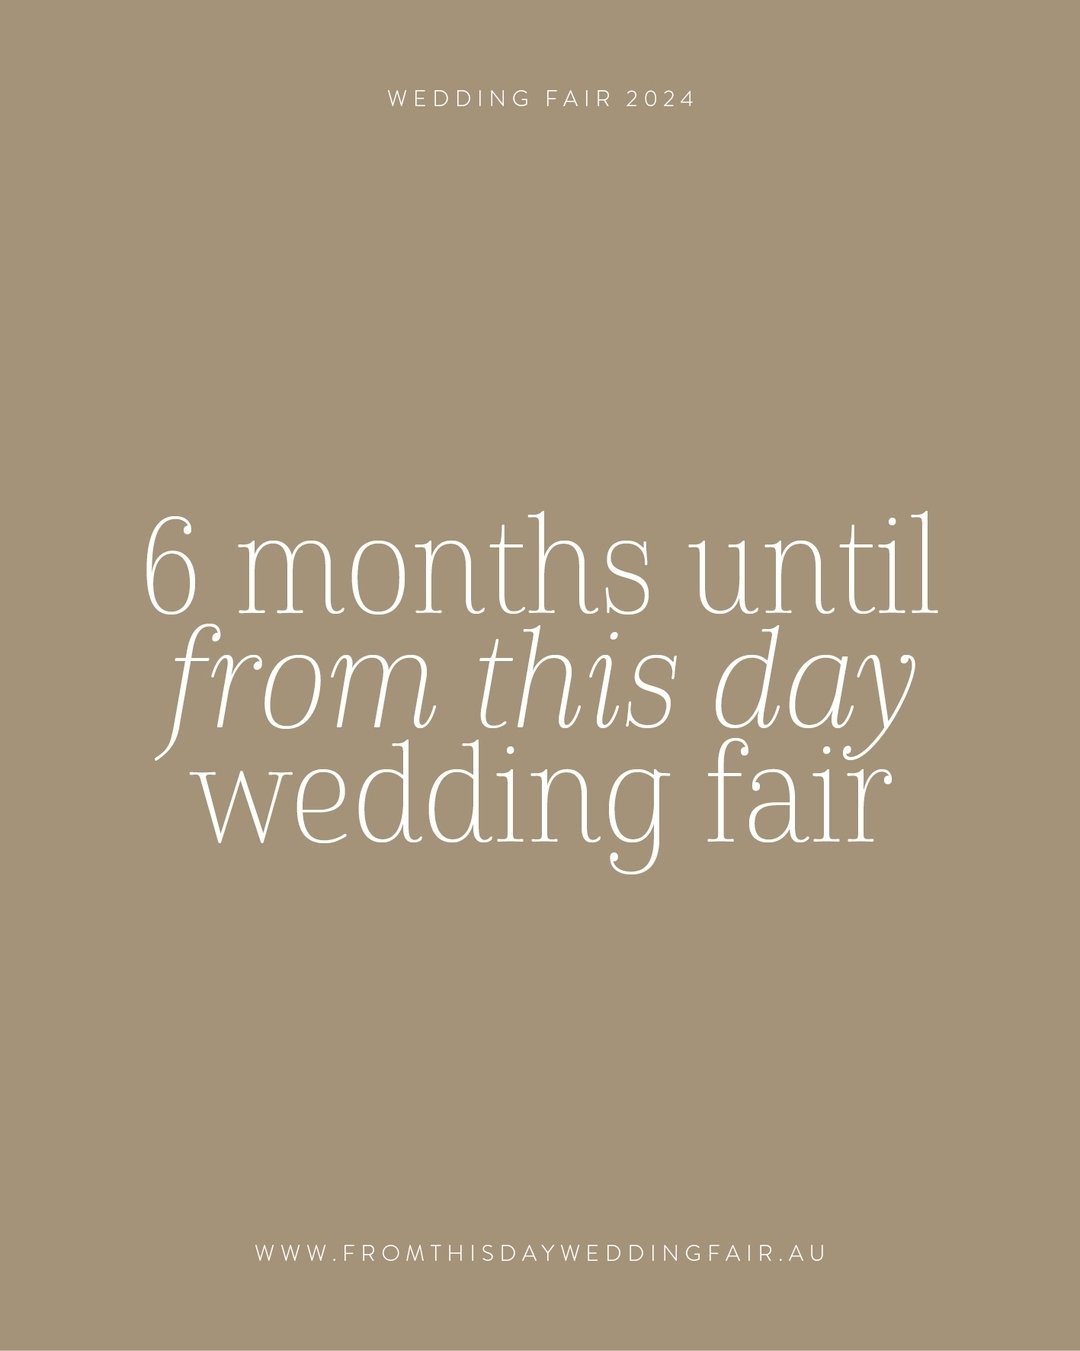 6 MONTHS UNTIL OUR 2024 WEDDING FAIR!!

Have you secured your FREE event tickets yet? 

Simply head to the link in our bio and get yours today!

✨ Sunday 27 October
✨ Sabina River Farm
✨ 12:00pm - 3:00pm
✨ Food, drinks, live music, heaps of wedding i